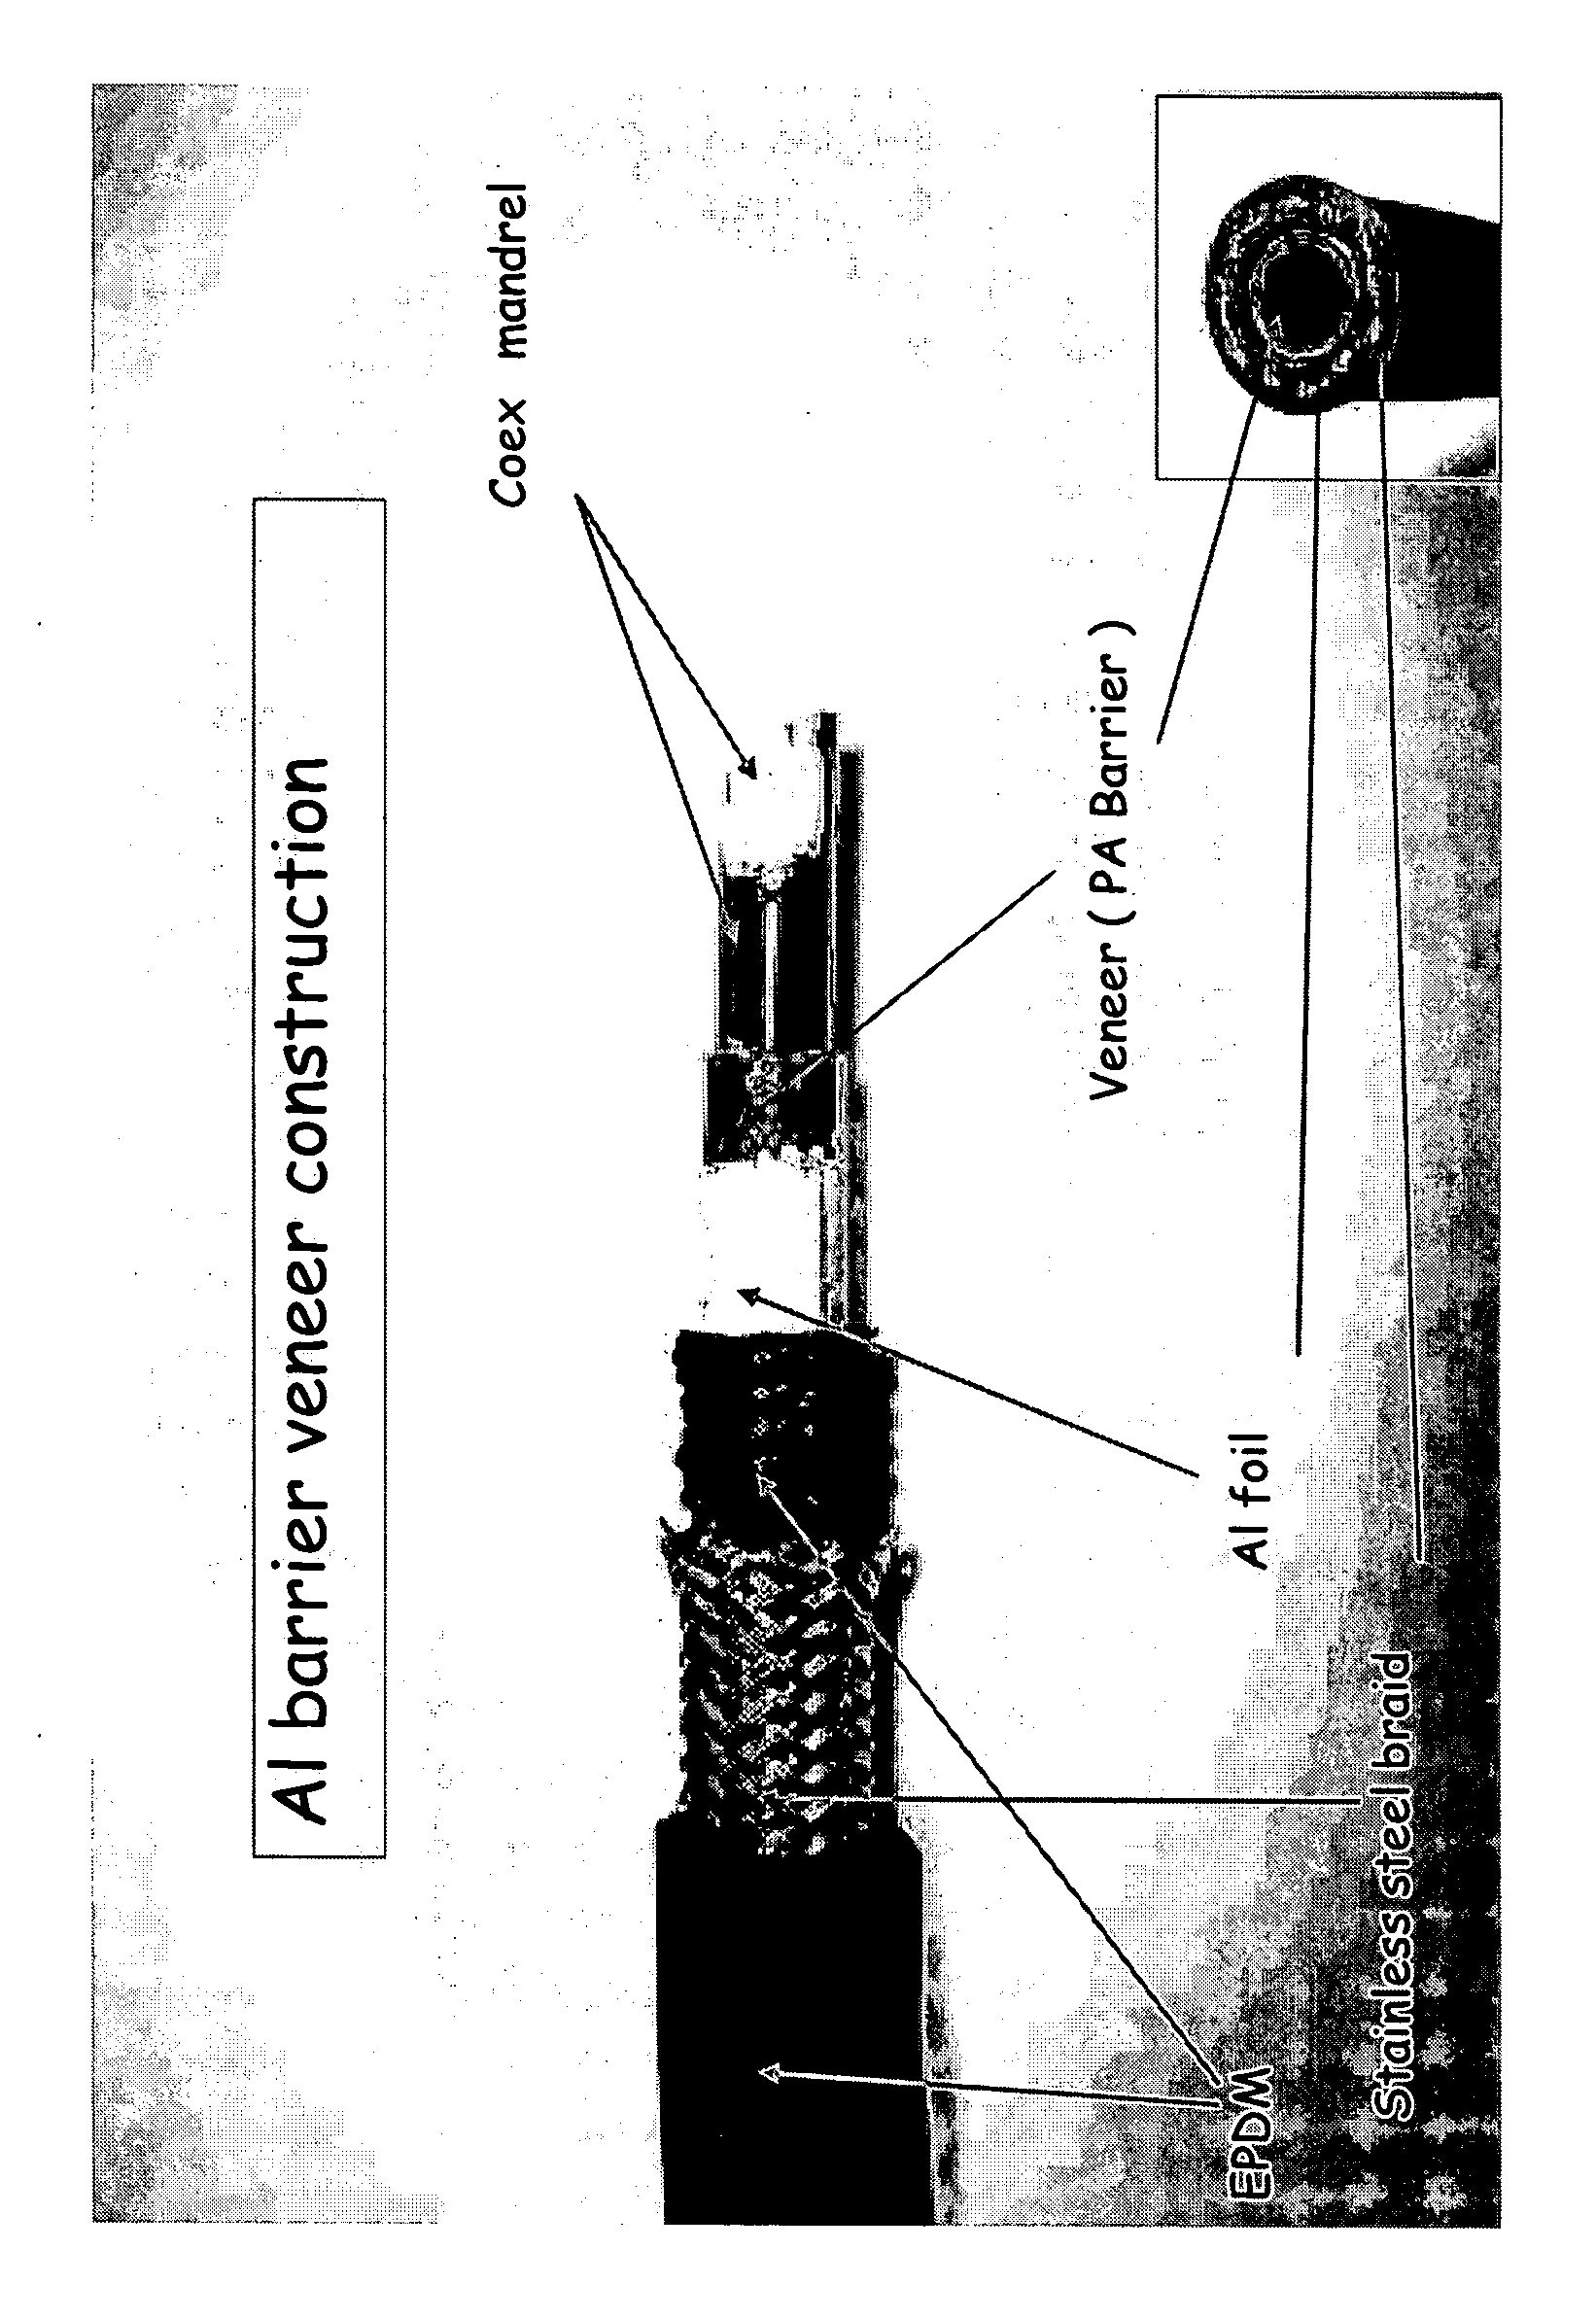 High pressure barrier hose and method of manufacture